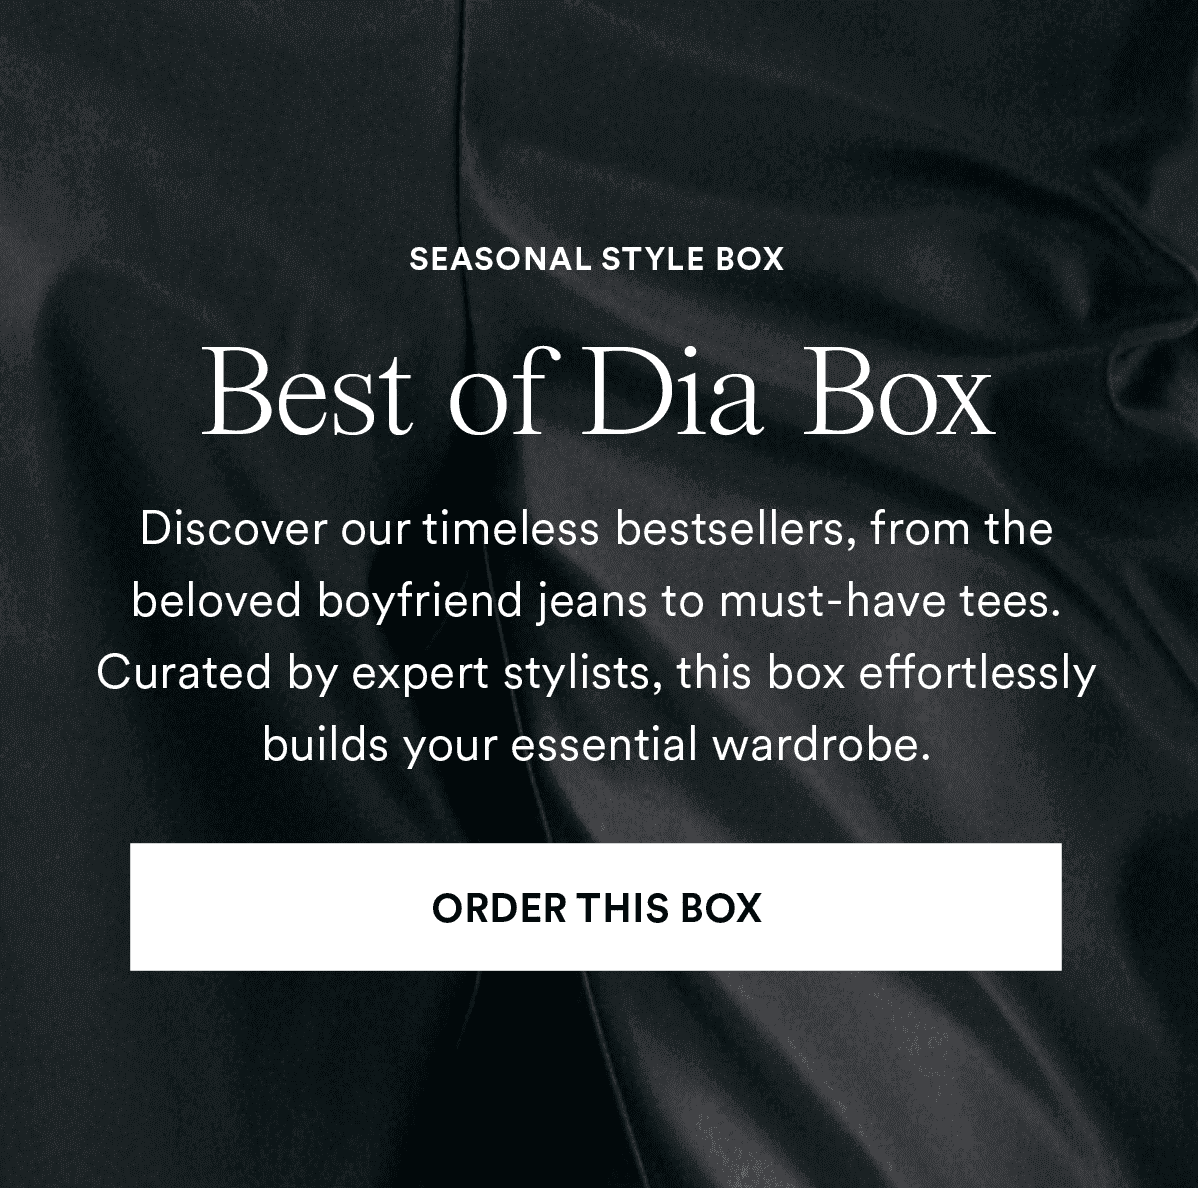 Best of Dia Box. Discover our timeless bestsellers, from the beloved boyfriend jeans to must-have tees. Curated by expert stylists, this box effortlessly builds your essential wardrobe. Order This Box